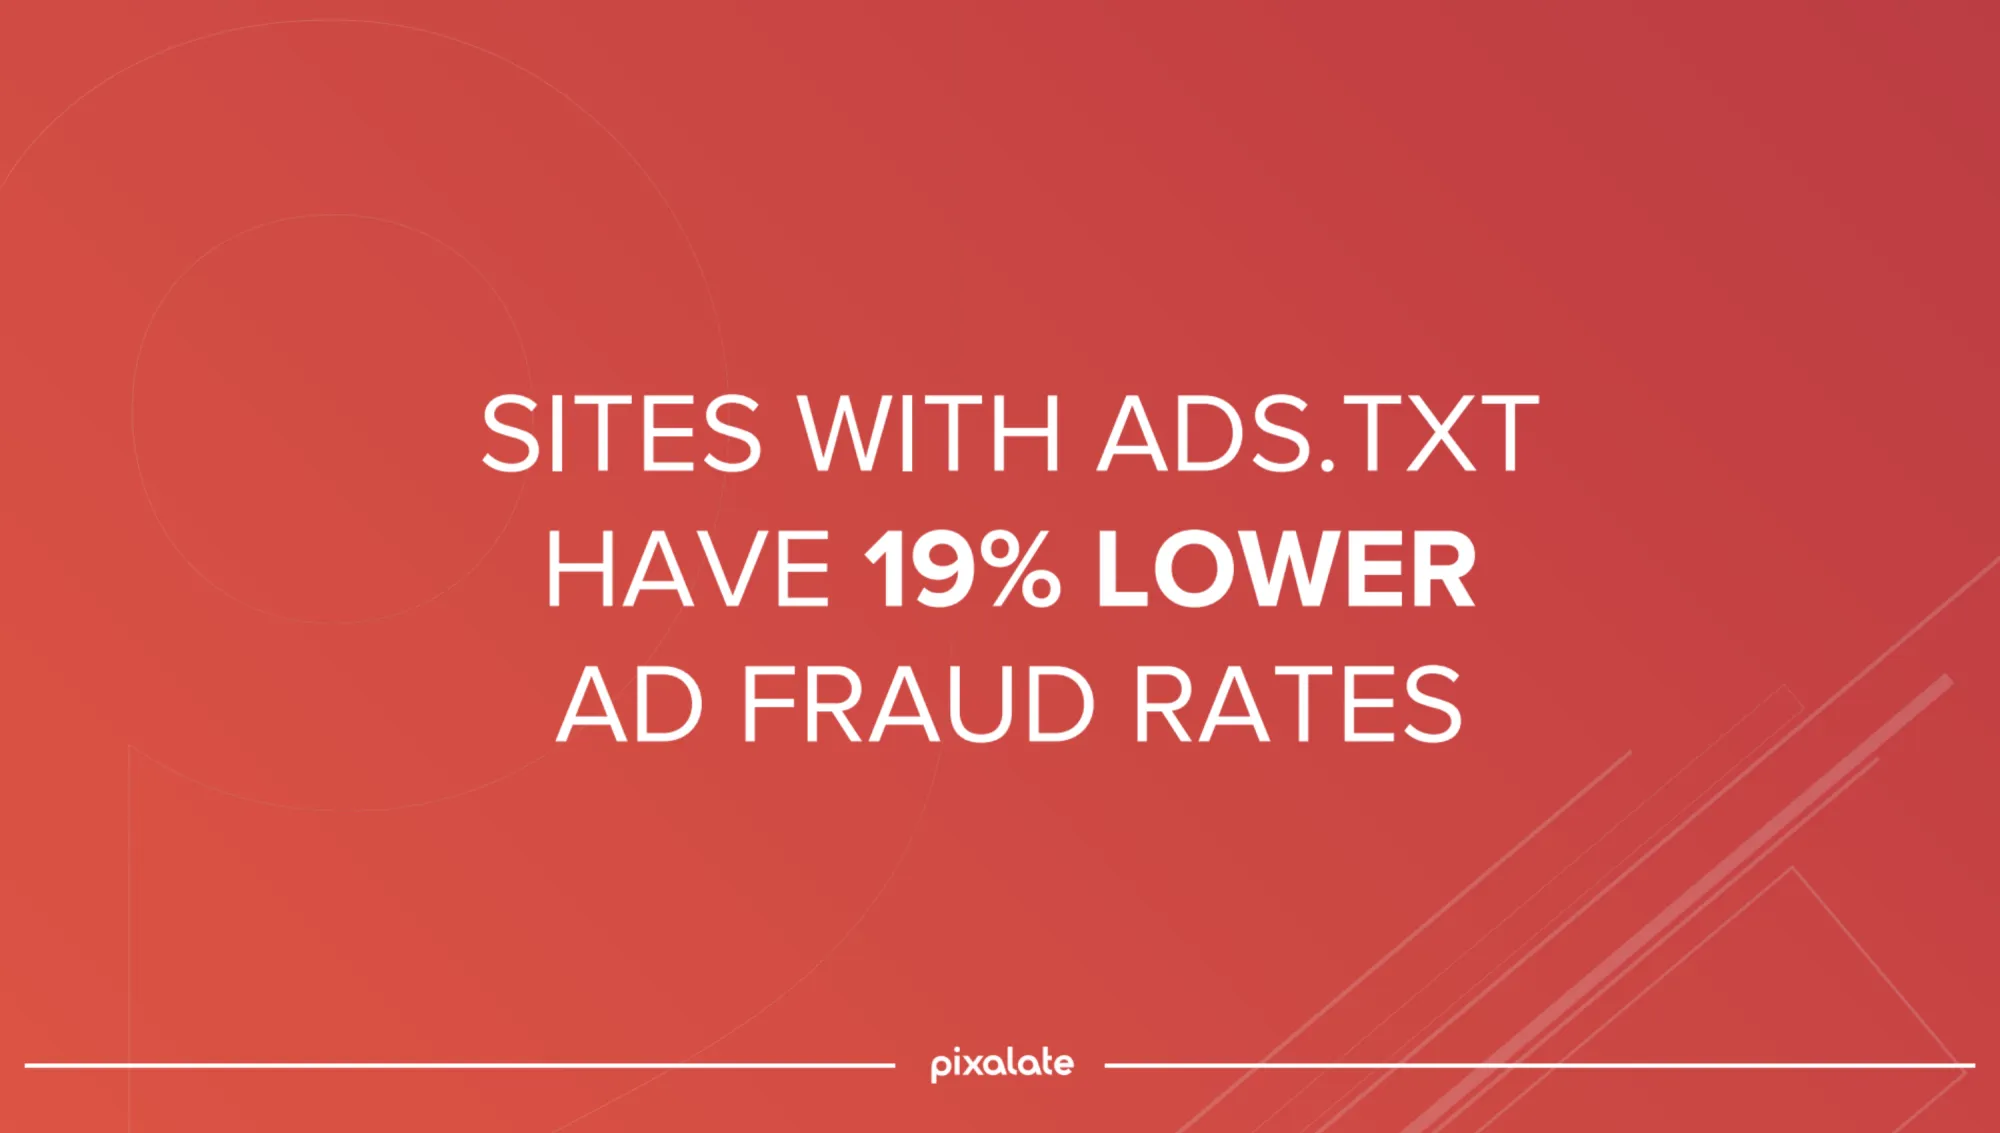 Buying ads.txt authorized sellers reduces the ad fraud in 19%